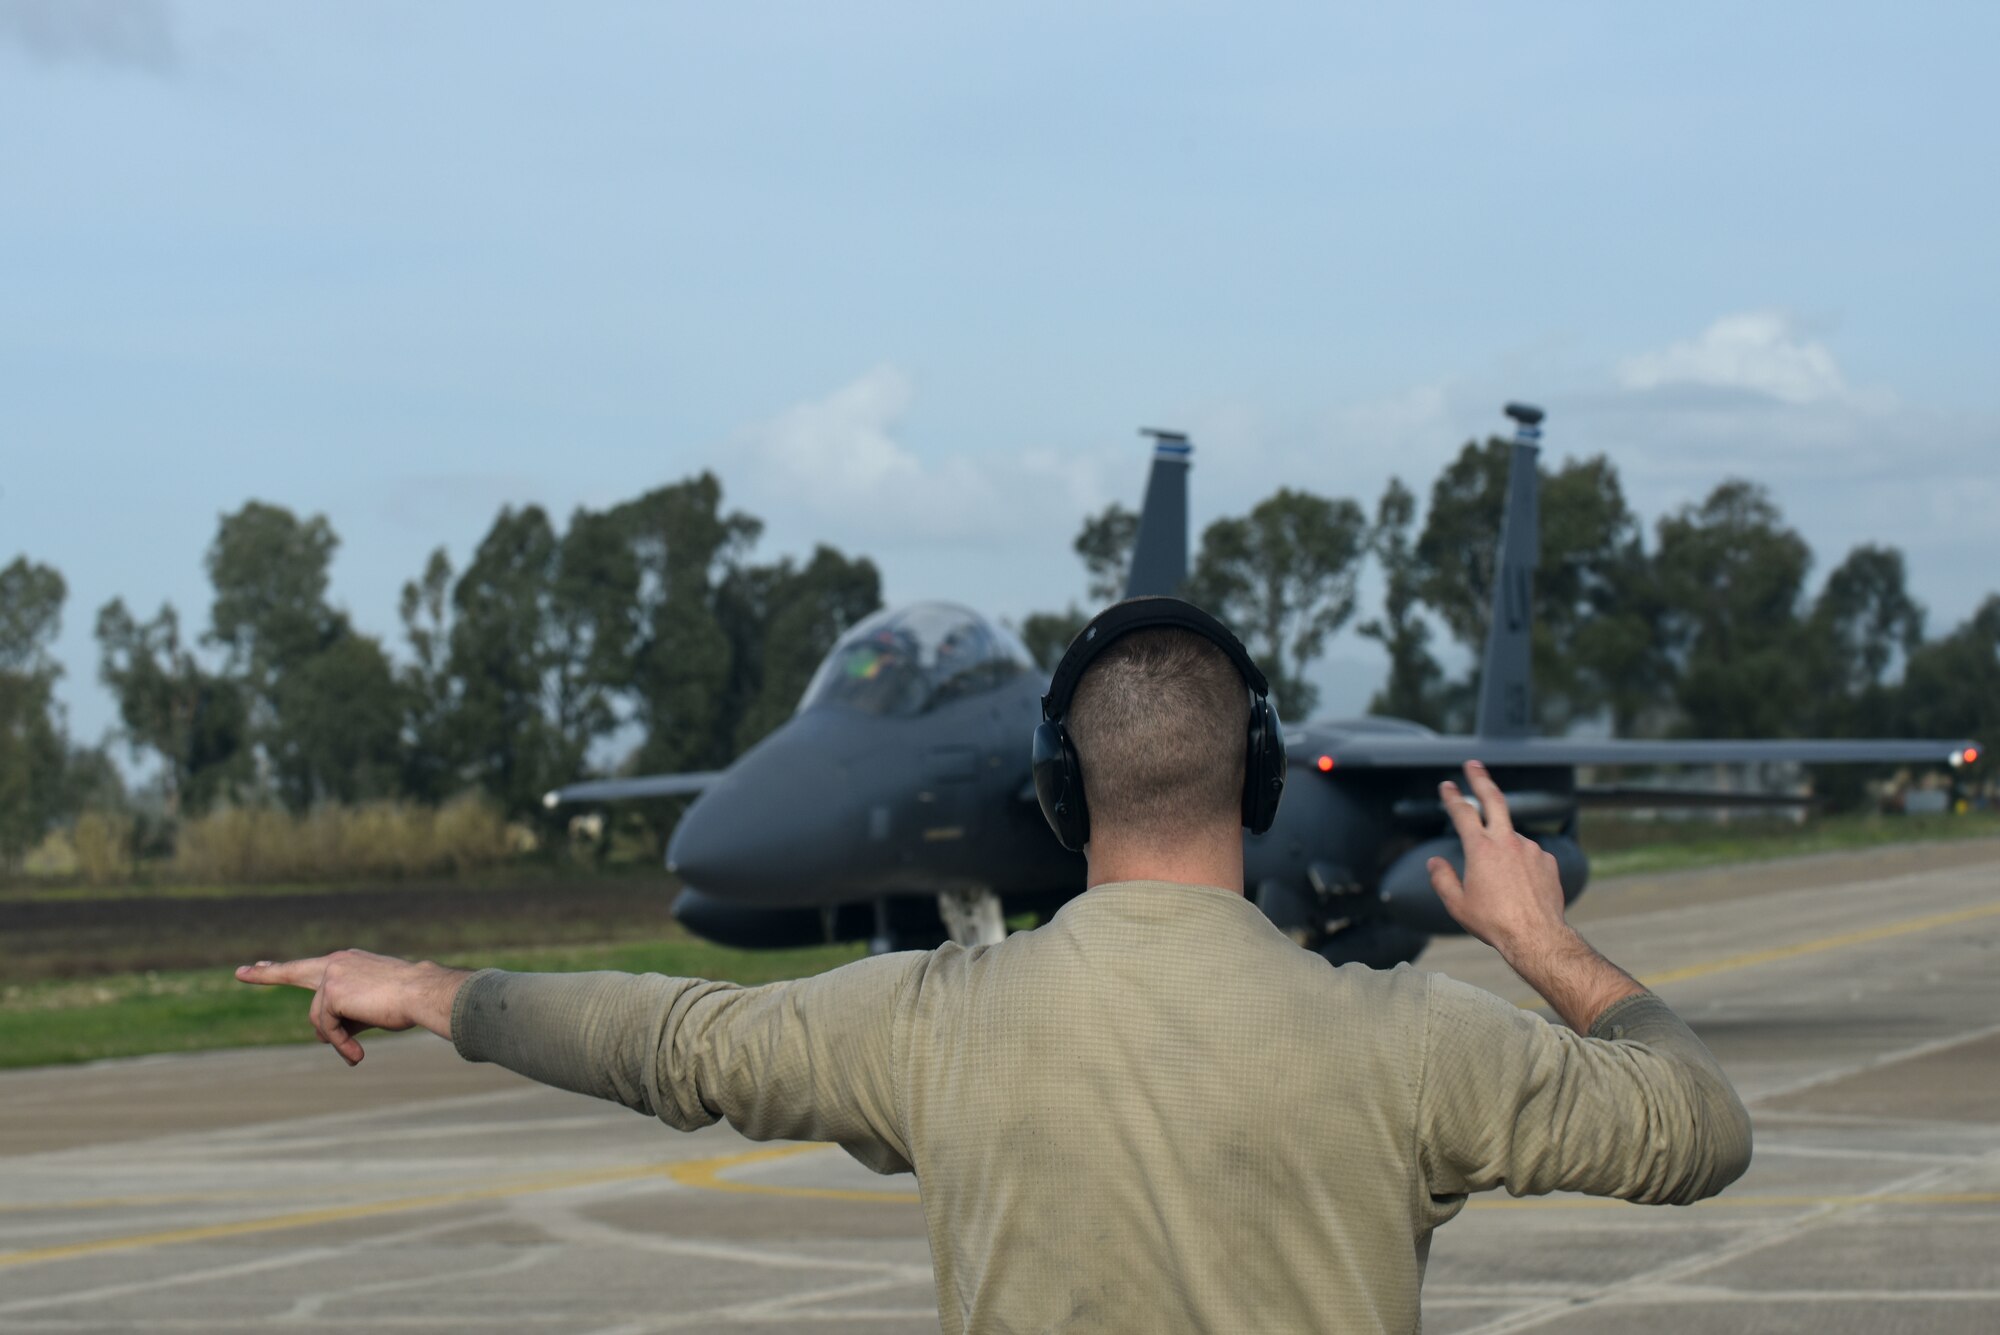 An Airman assigned to the 492nd Aircraft Maintenance Unit marshals an F-15E Strike Eagle, assigned to the 492nd Fighter Squadron from Royal Air Force Lakenheath, England, at Andravida Air Base, Greece, March 7. The 492nd FS is scheduled to participate in INIOHOS 18, a Hellenic Air Force-led, large-force flying exercise that is slated to involve seven countries and over 50 aircraft. (U.S. Air Force photo/Airman 1st Class Eli Chevalier)